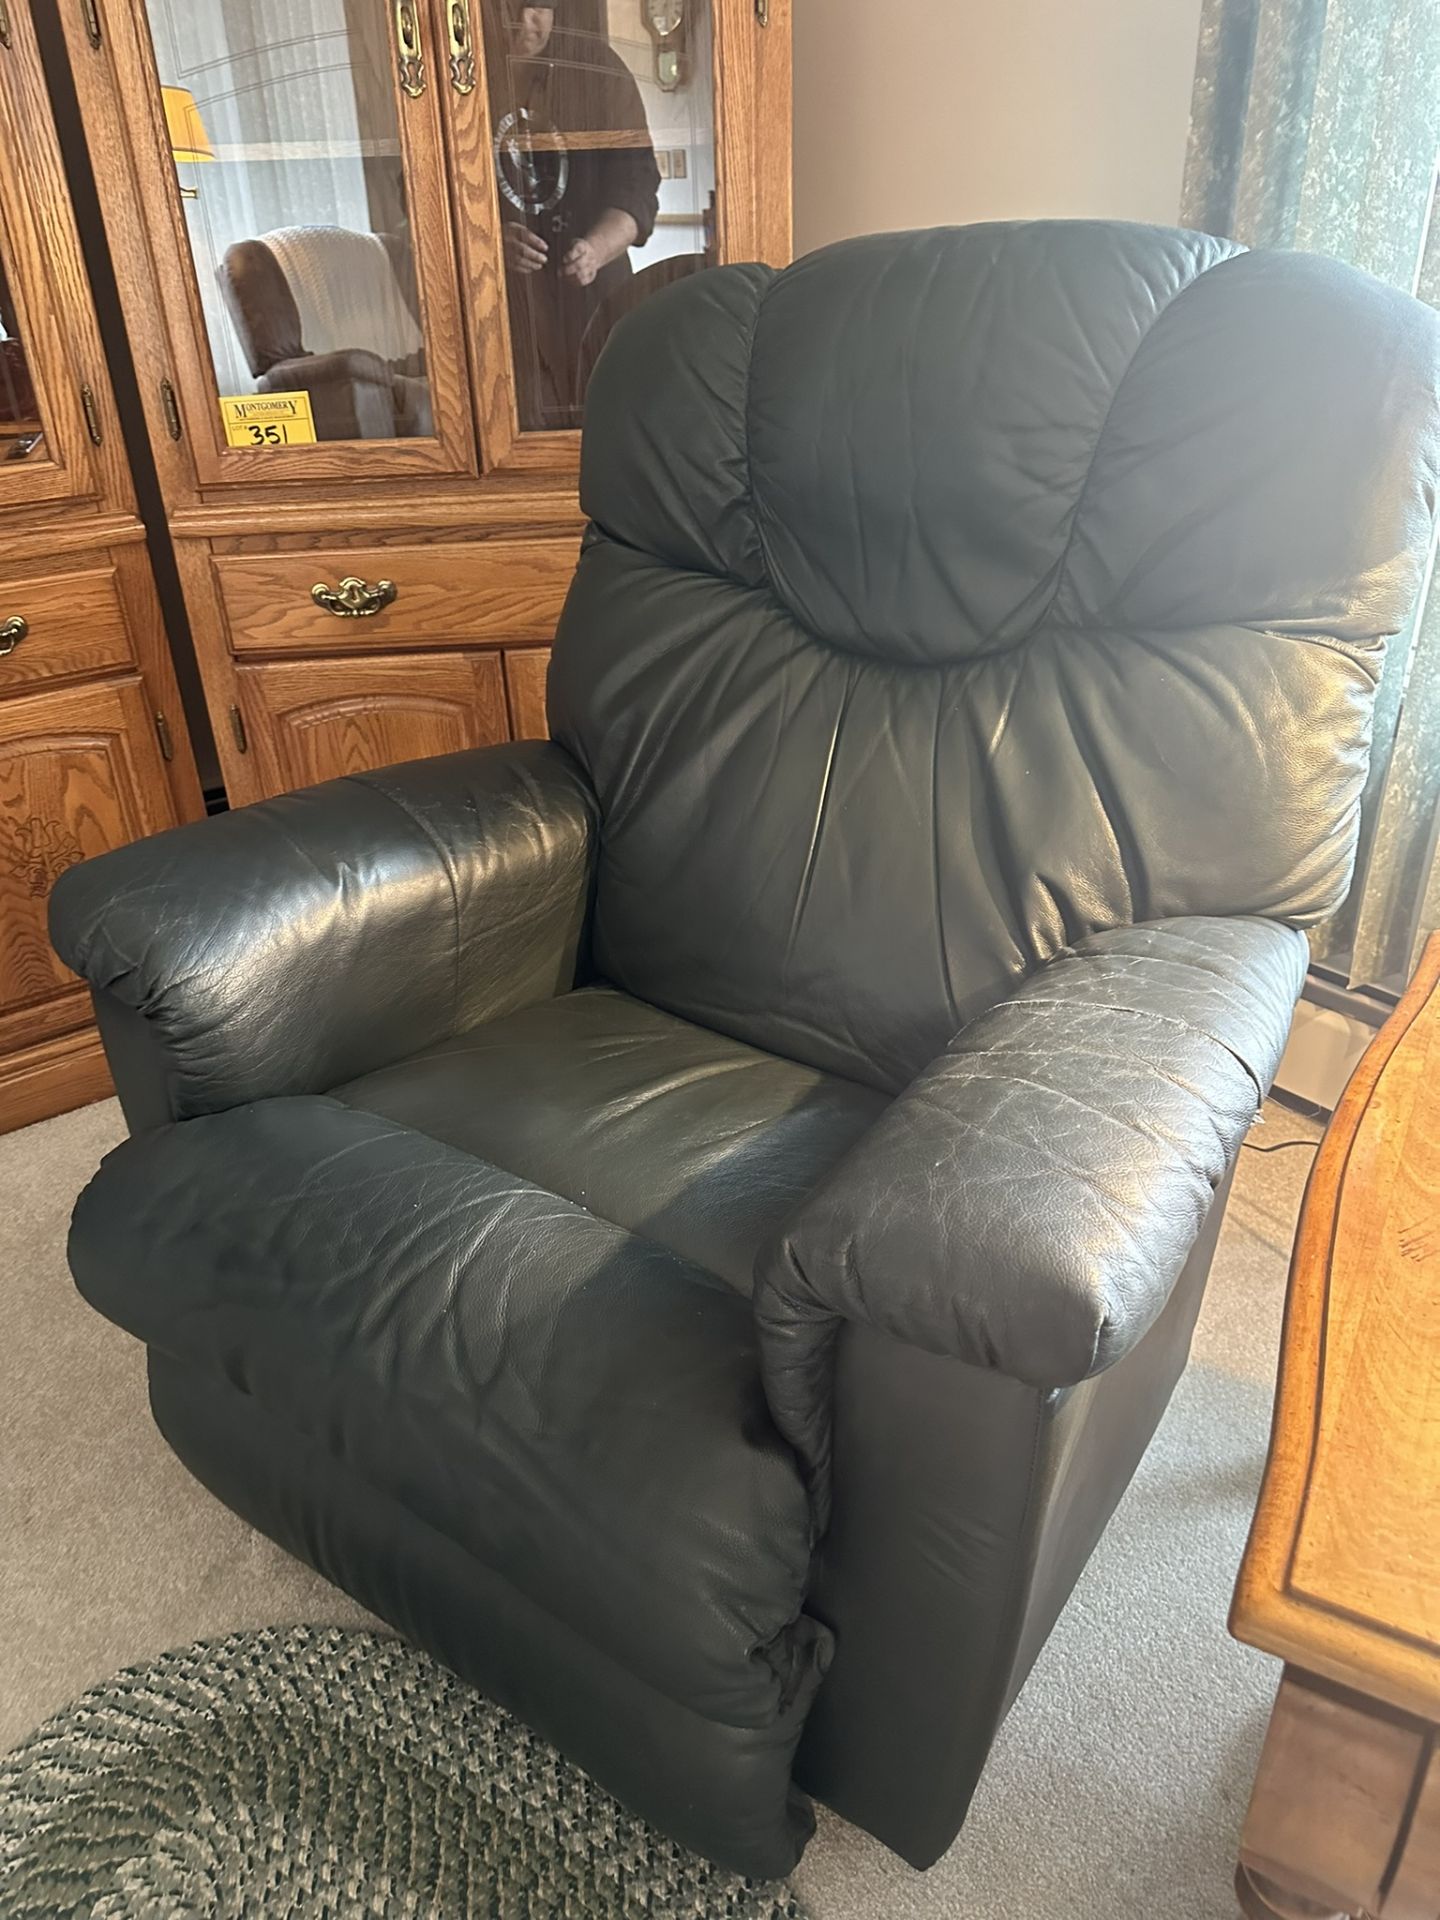 LEATHER RECLINING LOVESEAT AND ROCKING CHAIR - Image 2 of 3